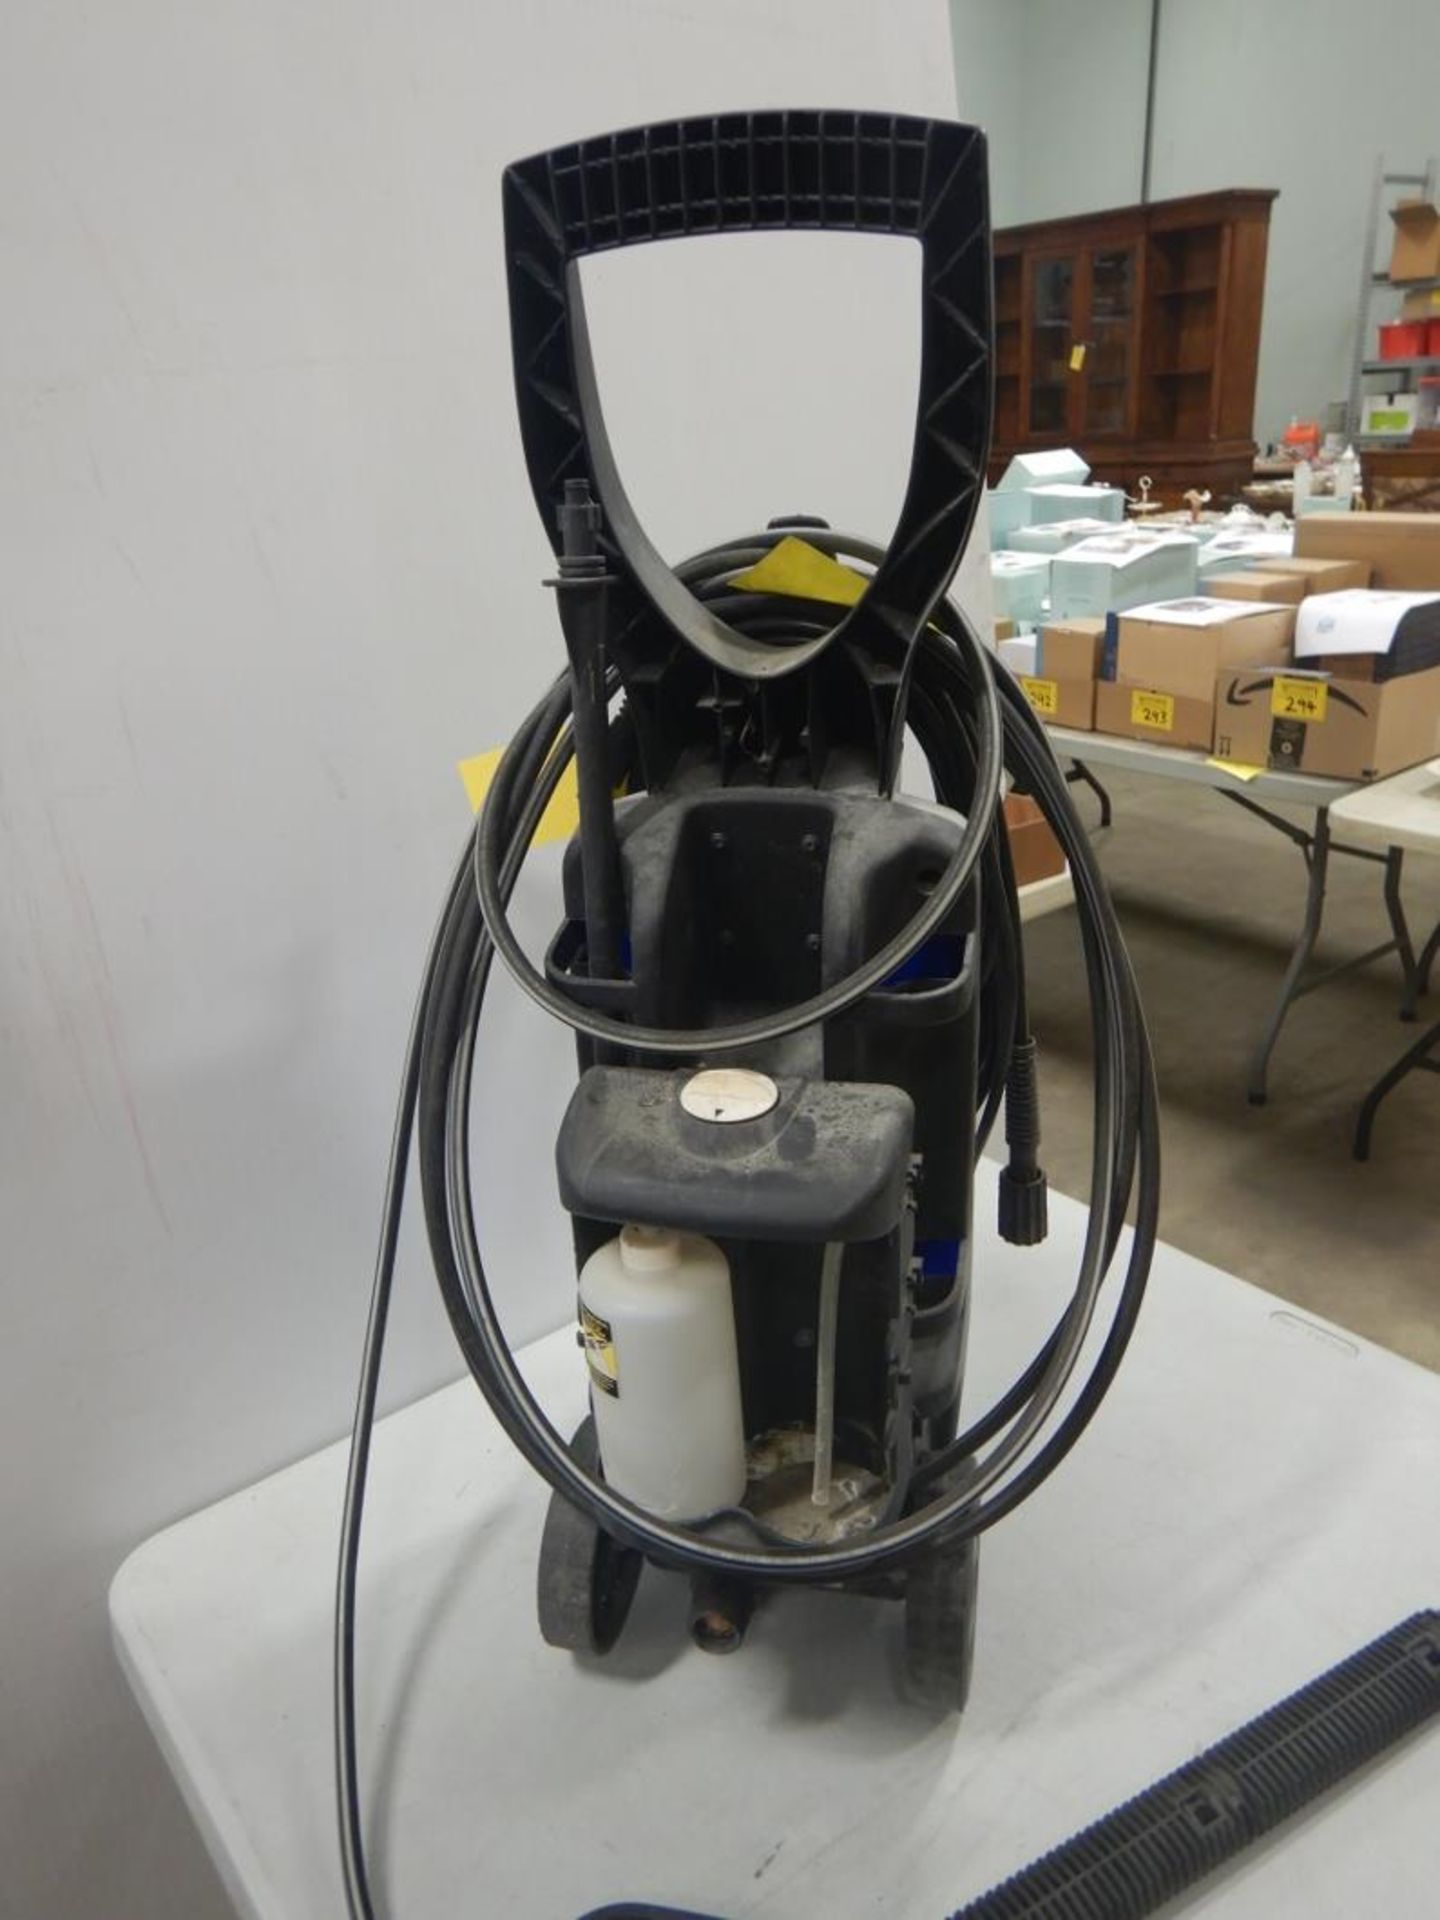 SIMONIZ S1650 PRESSURE WASHER W/ WAND, SOAP RESERVOIR AND SOAP - Image 3 of 4